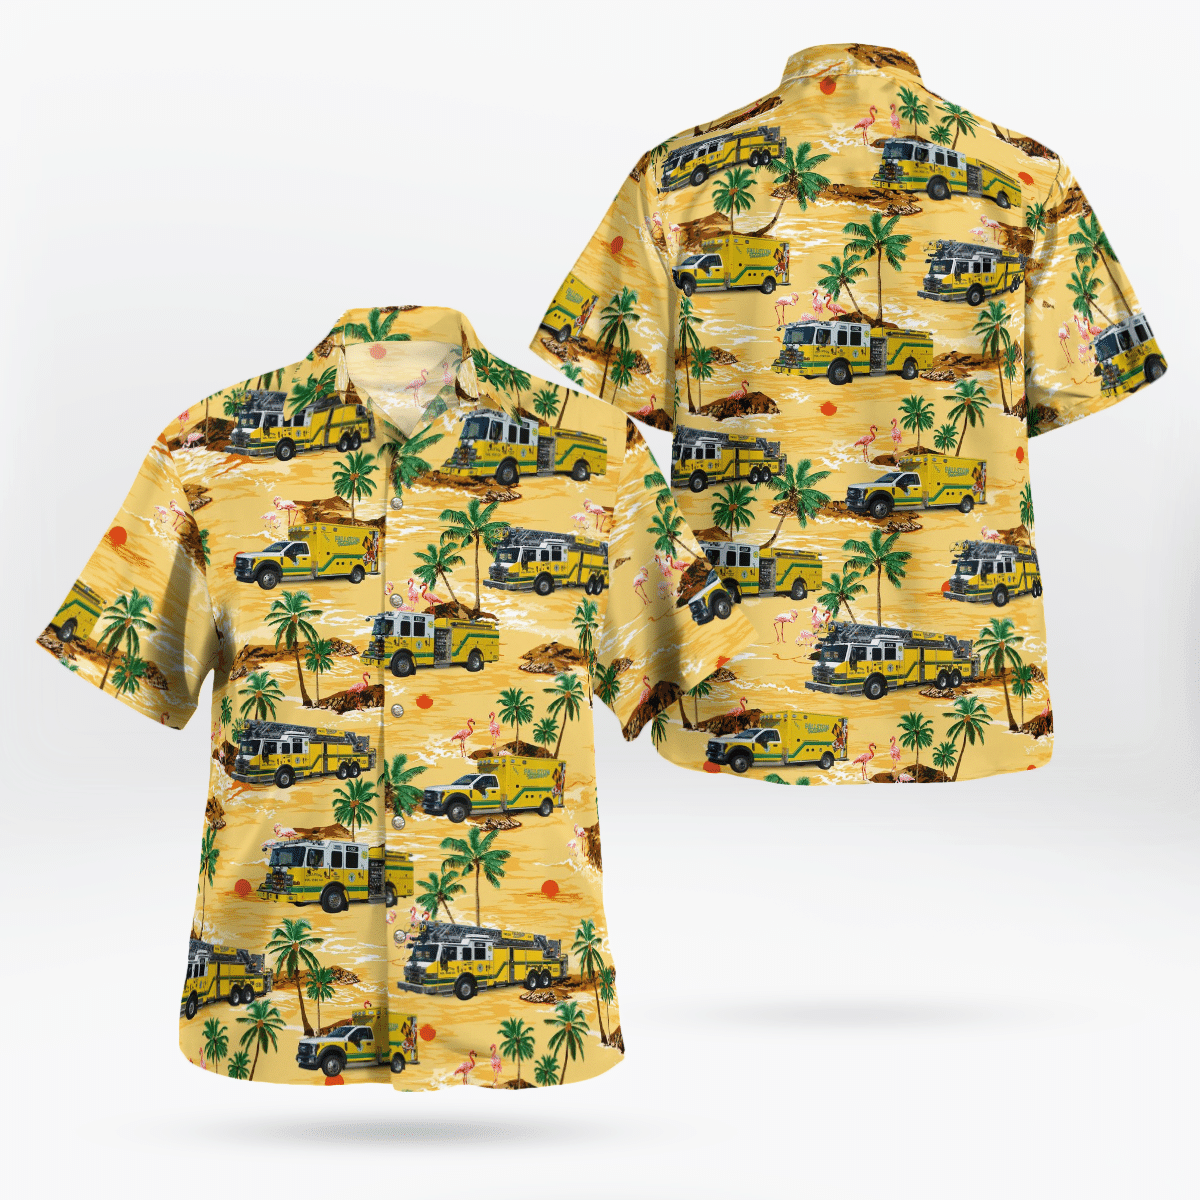 If you want to be noticed, wear These Trendy Hawaiian Shirt 116